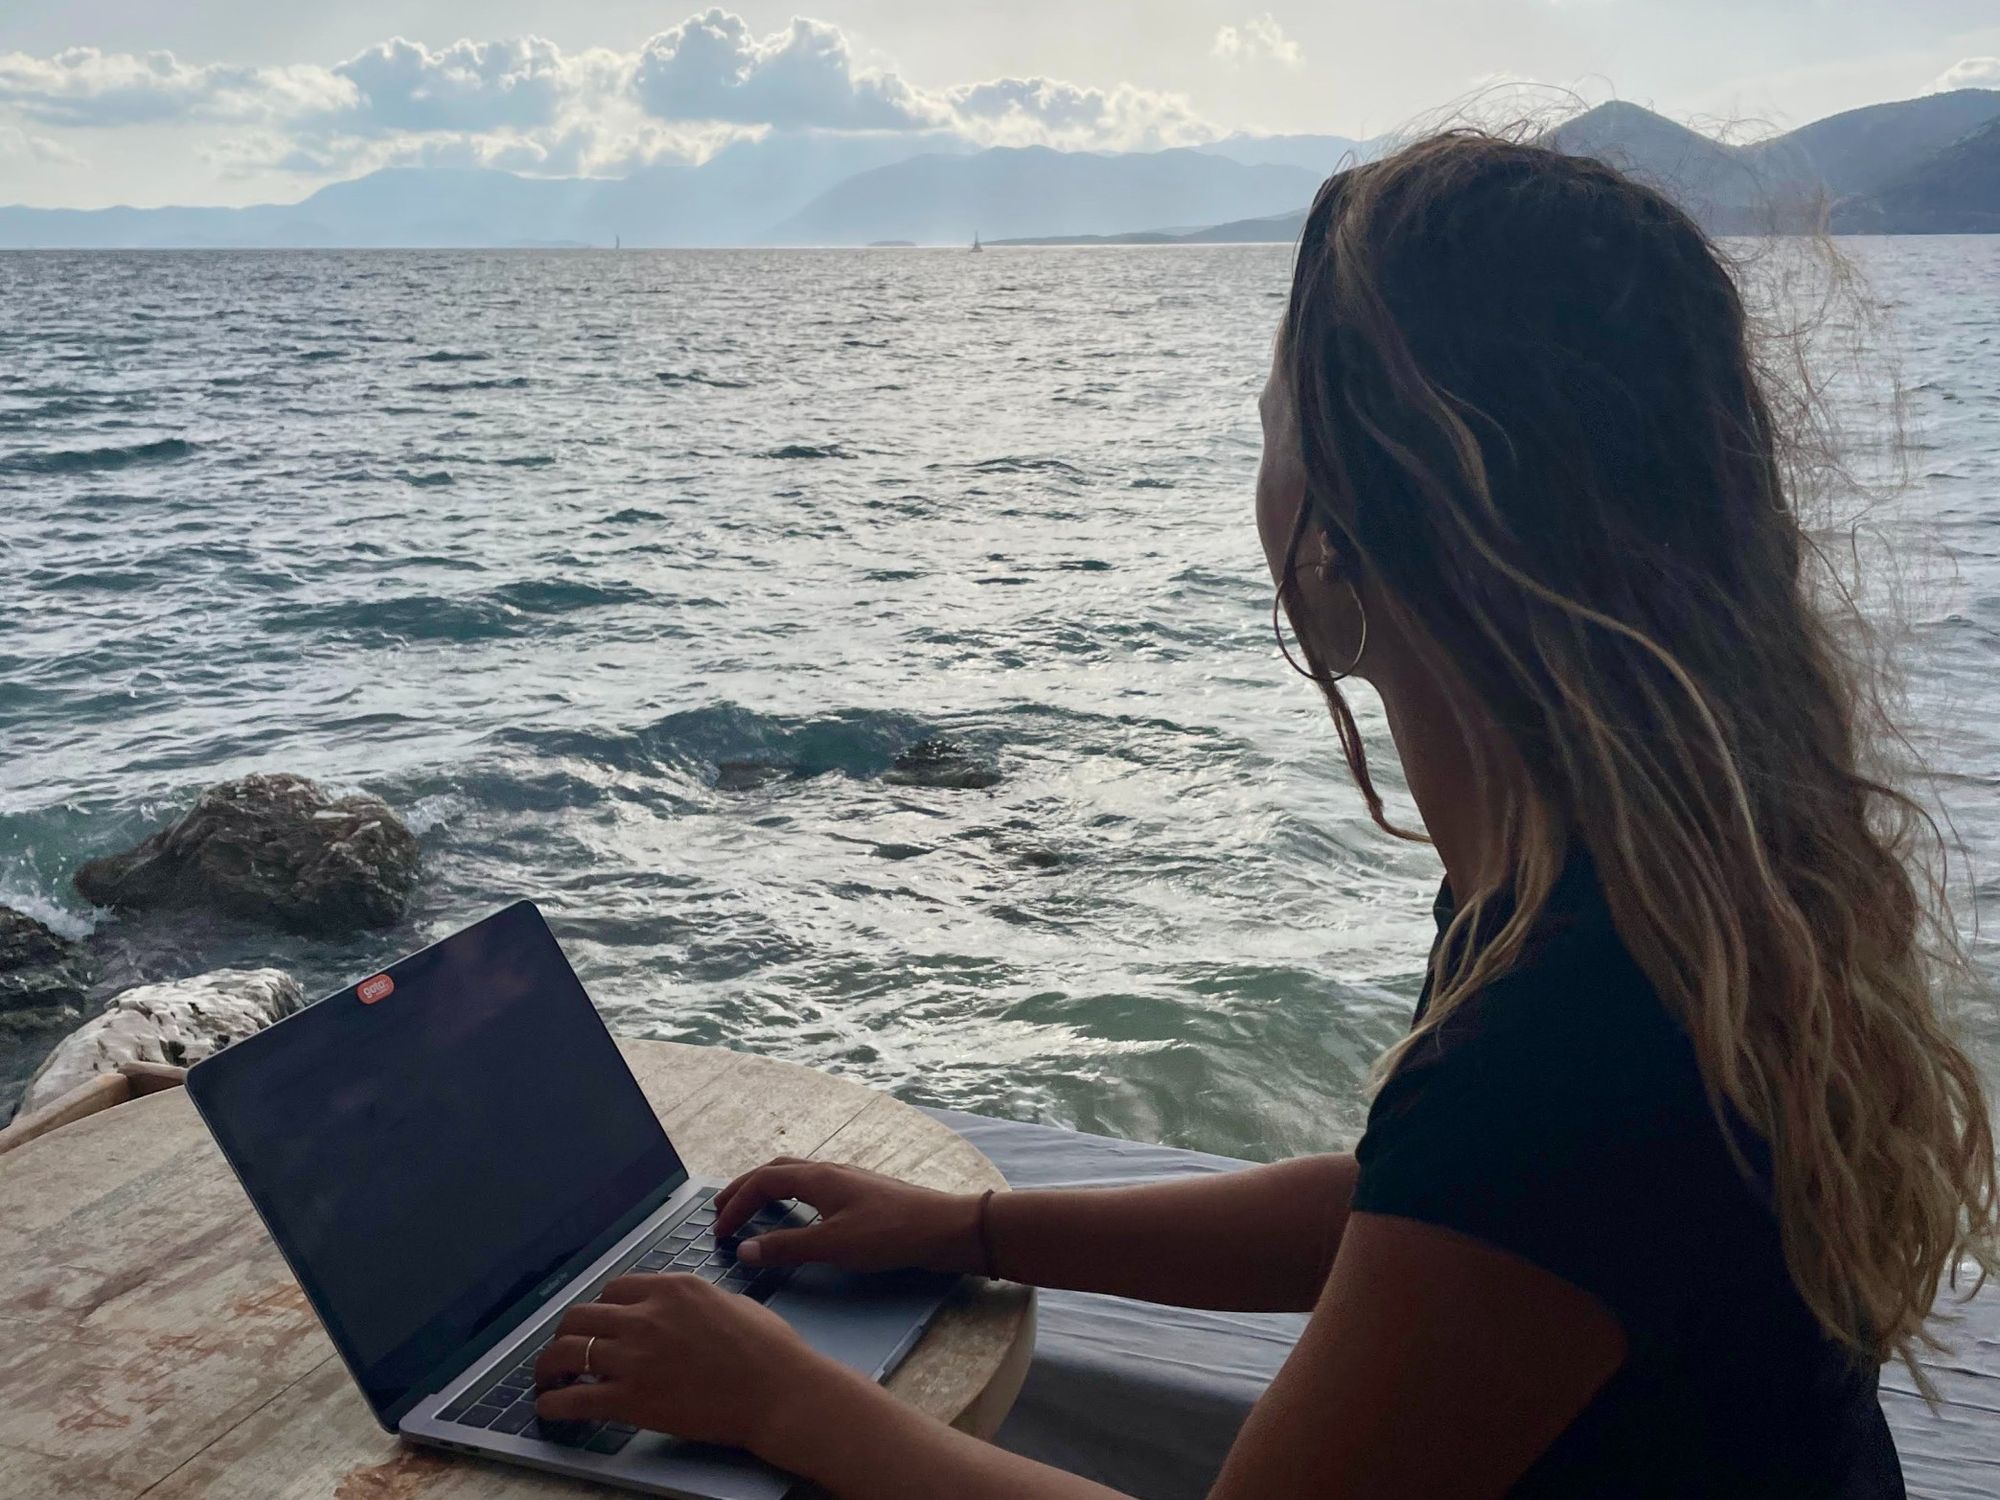 Lau working on her laptop near the ocean. Mountains in the background. Paleros Yacht Club, Greece